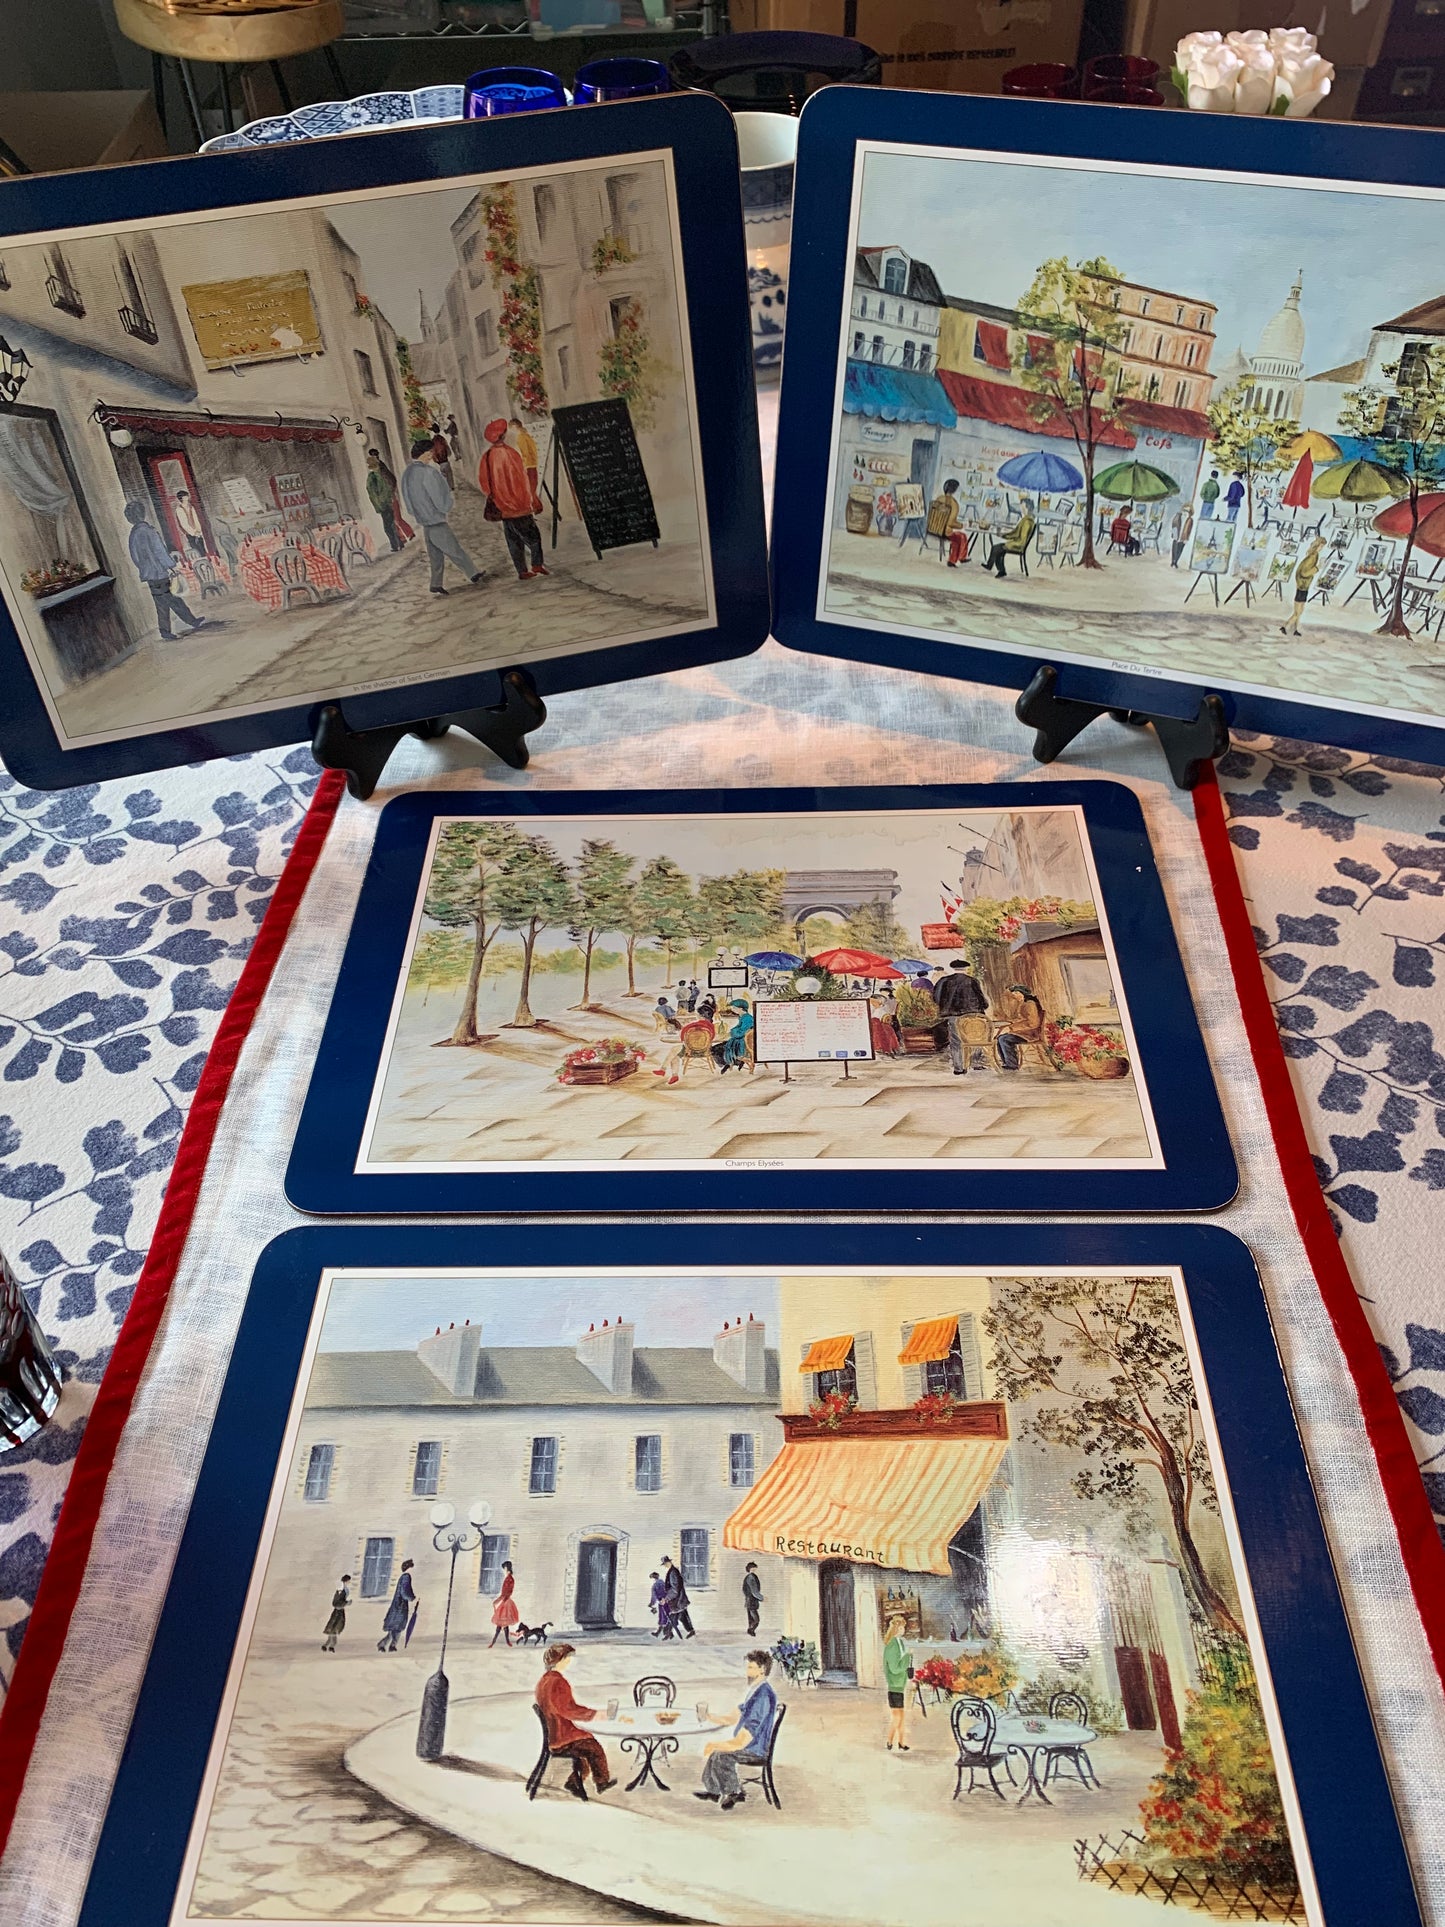 Set (4) Hard cork backed placemats with Paris scenes